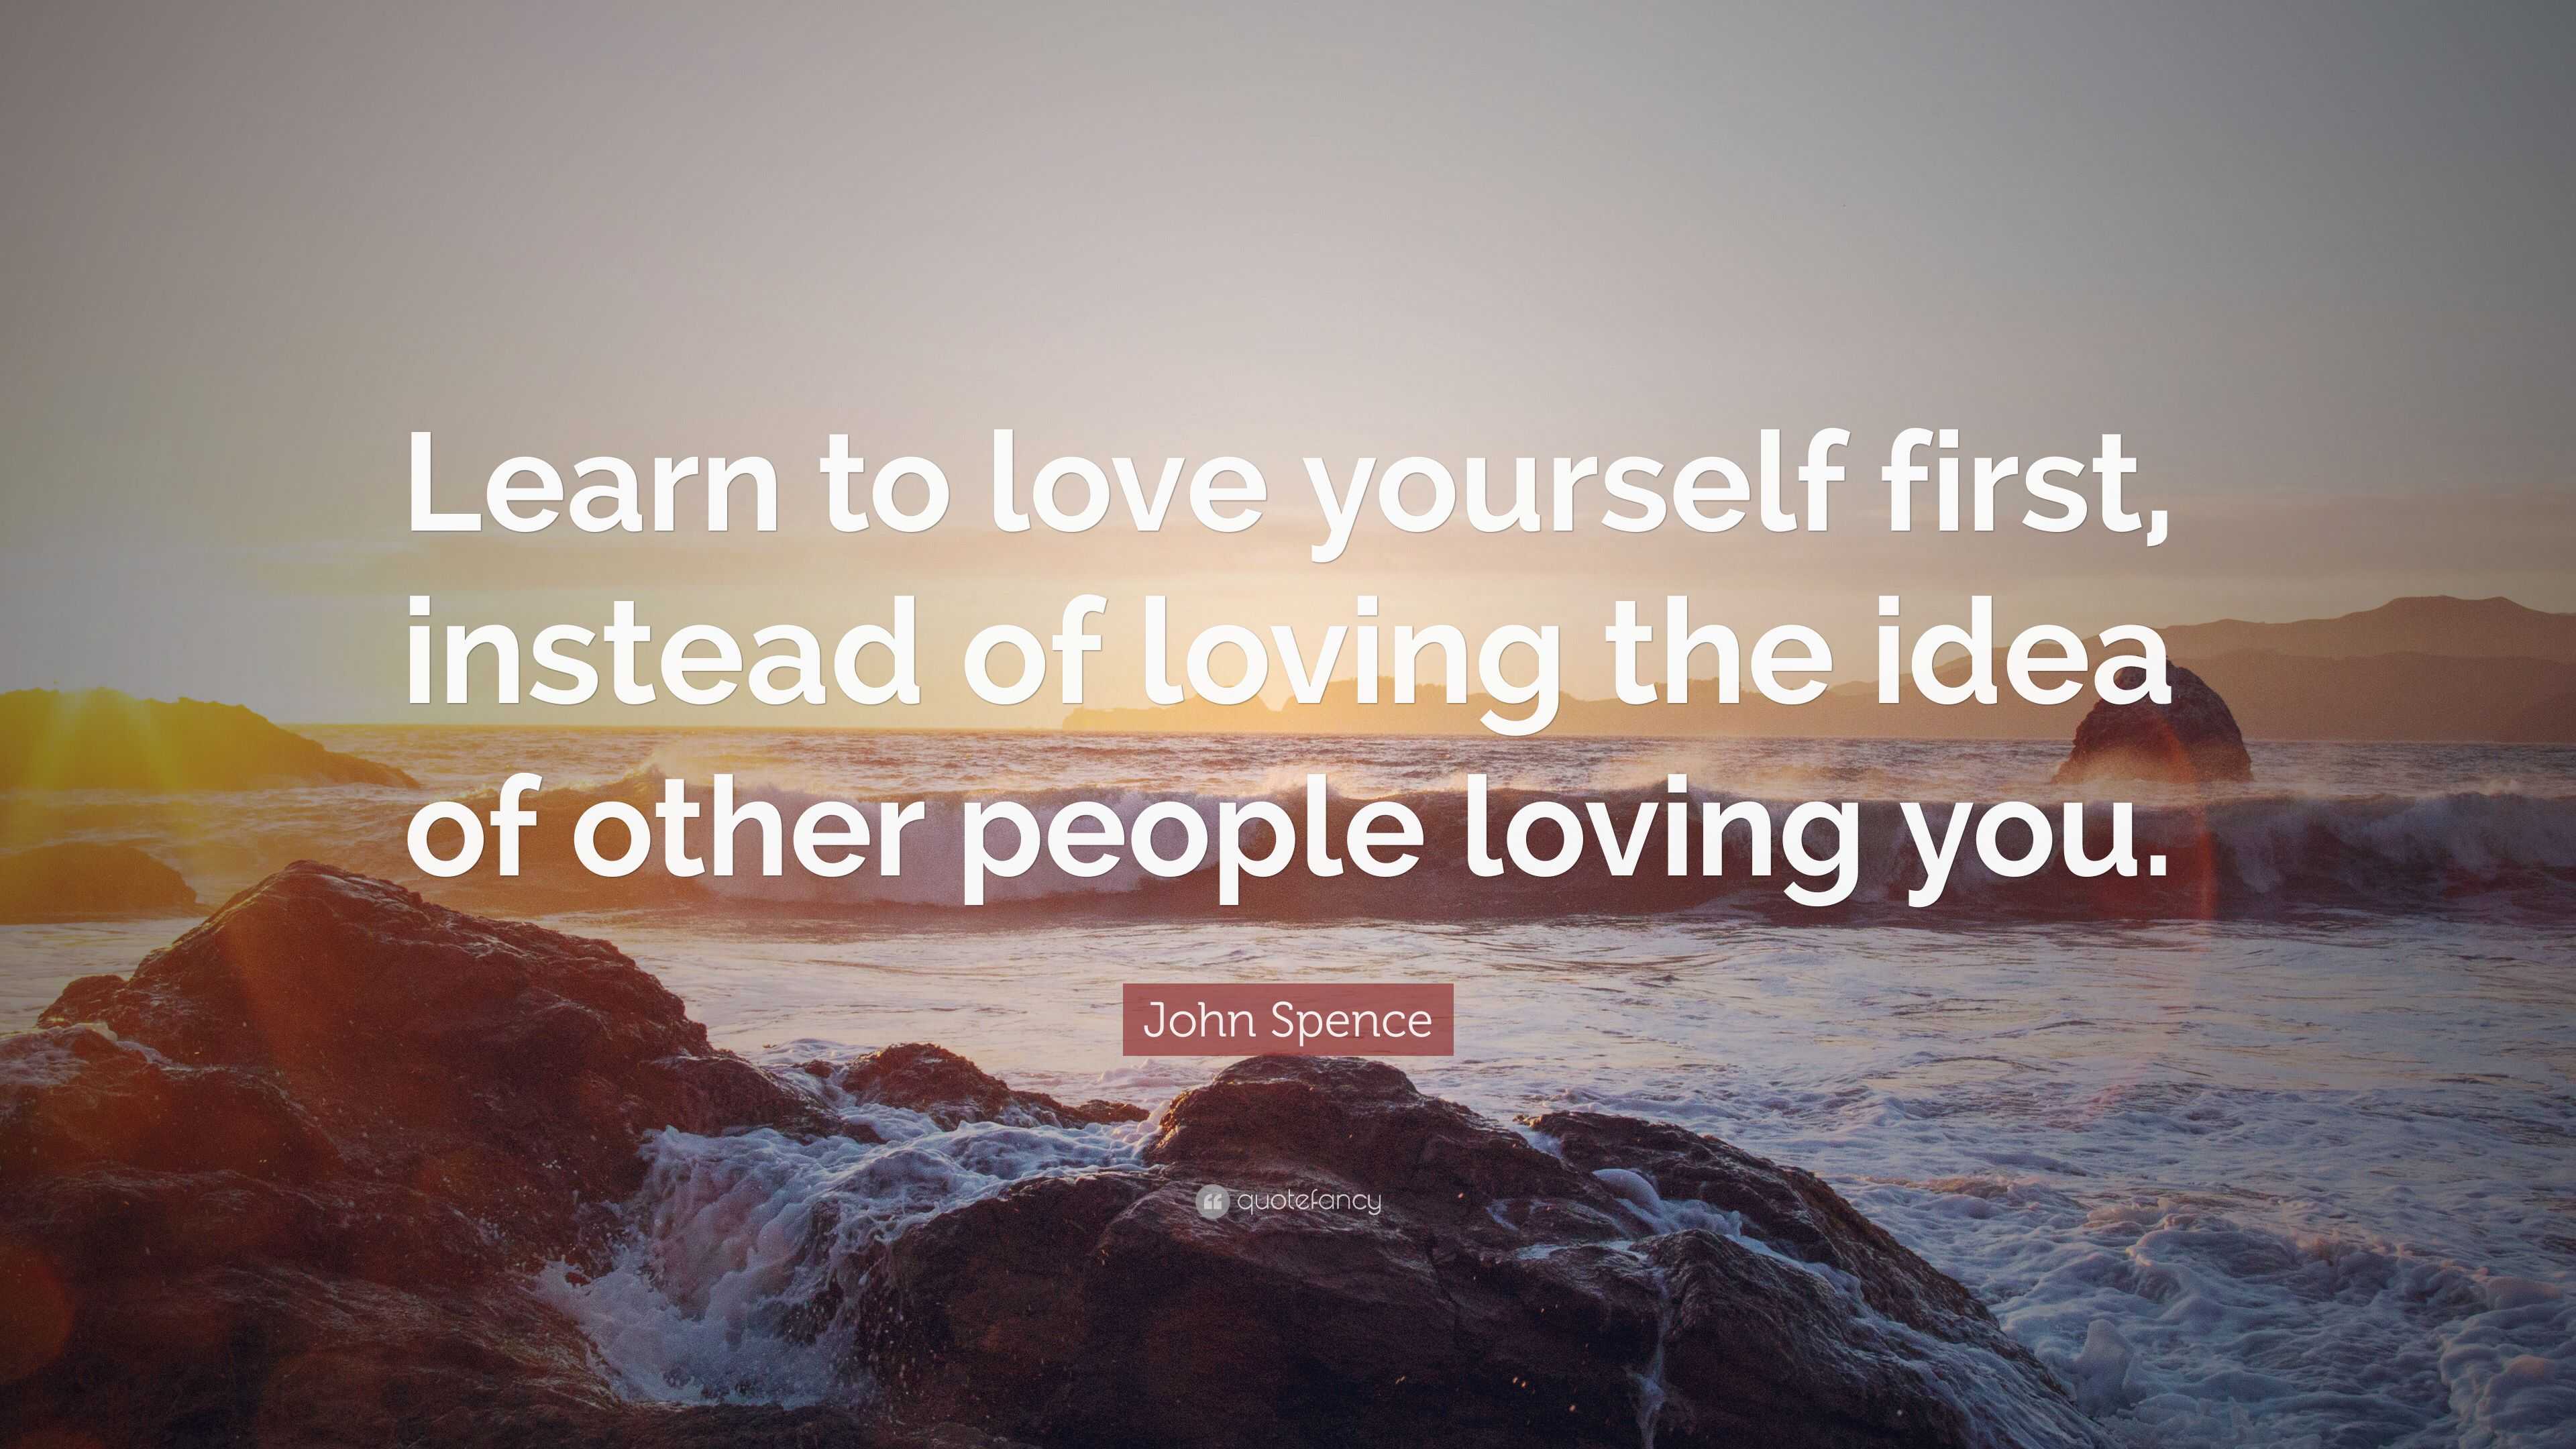 John Spence Quote: “Learn to love yourself first, instead of loving the ...